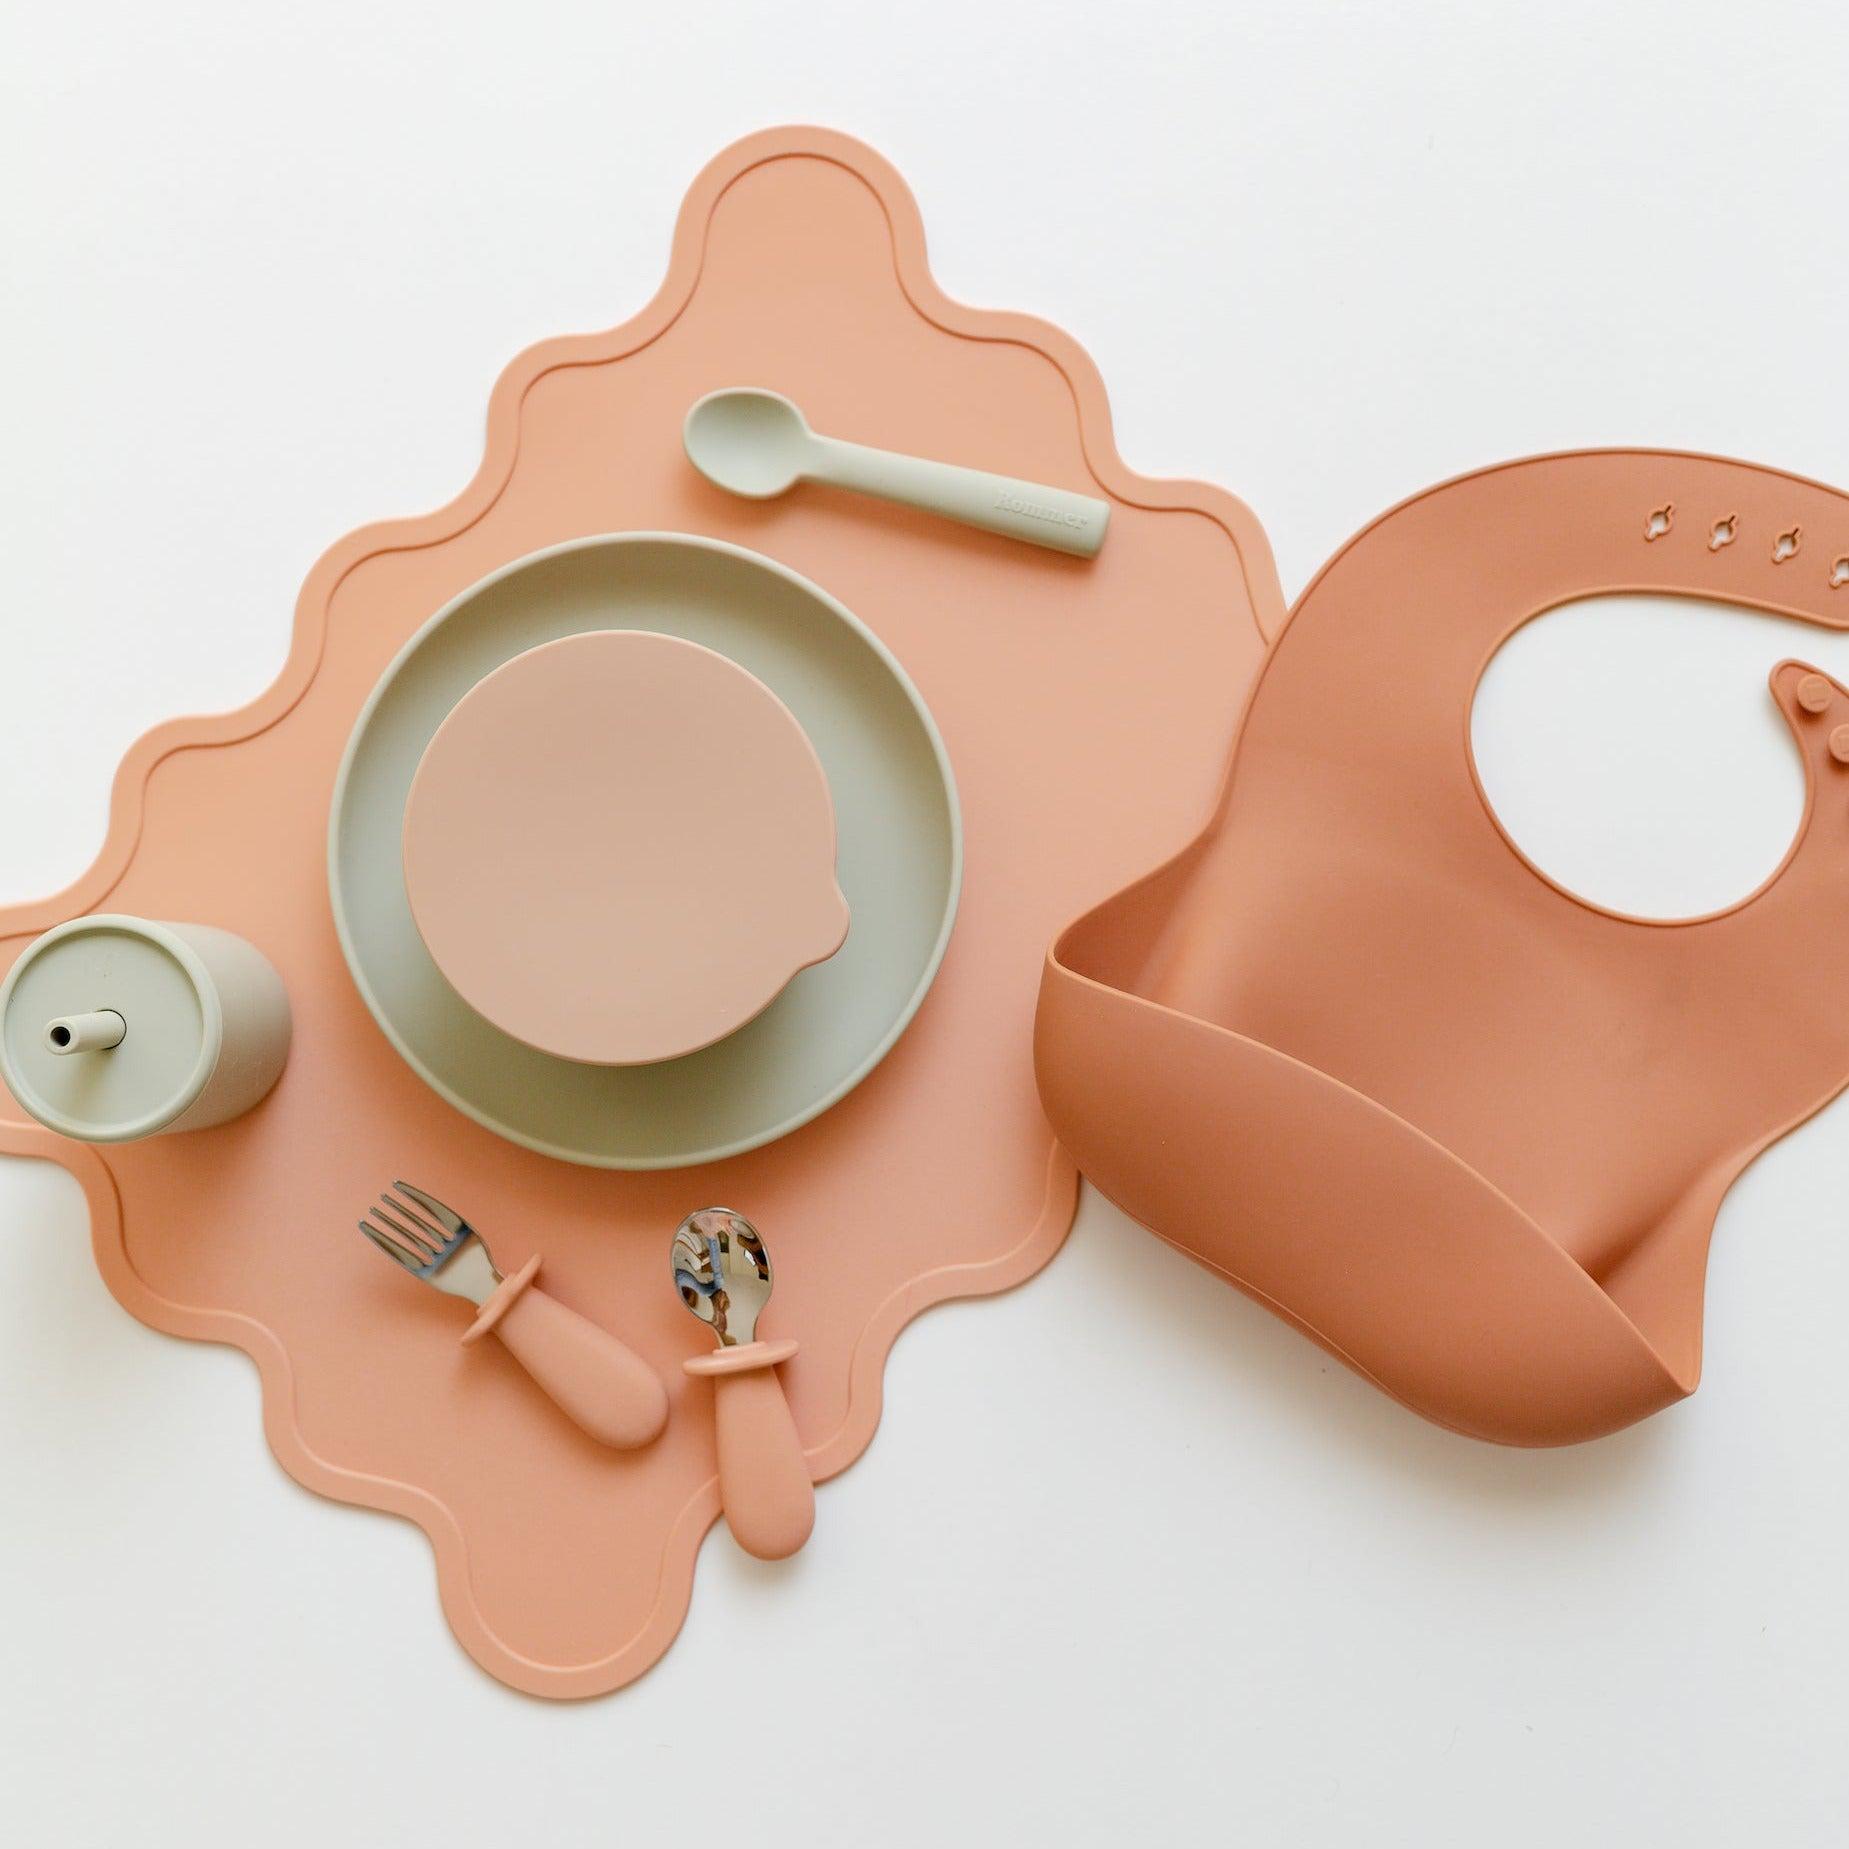 A set of Rommer Wiggly Placemat | melon plates, bowls and utensils on a table.